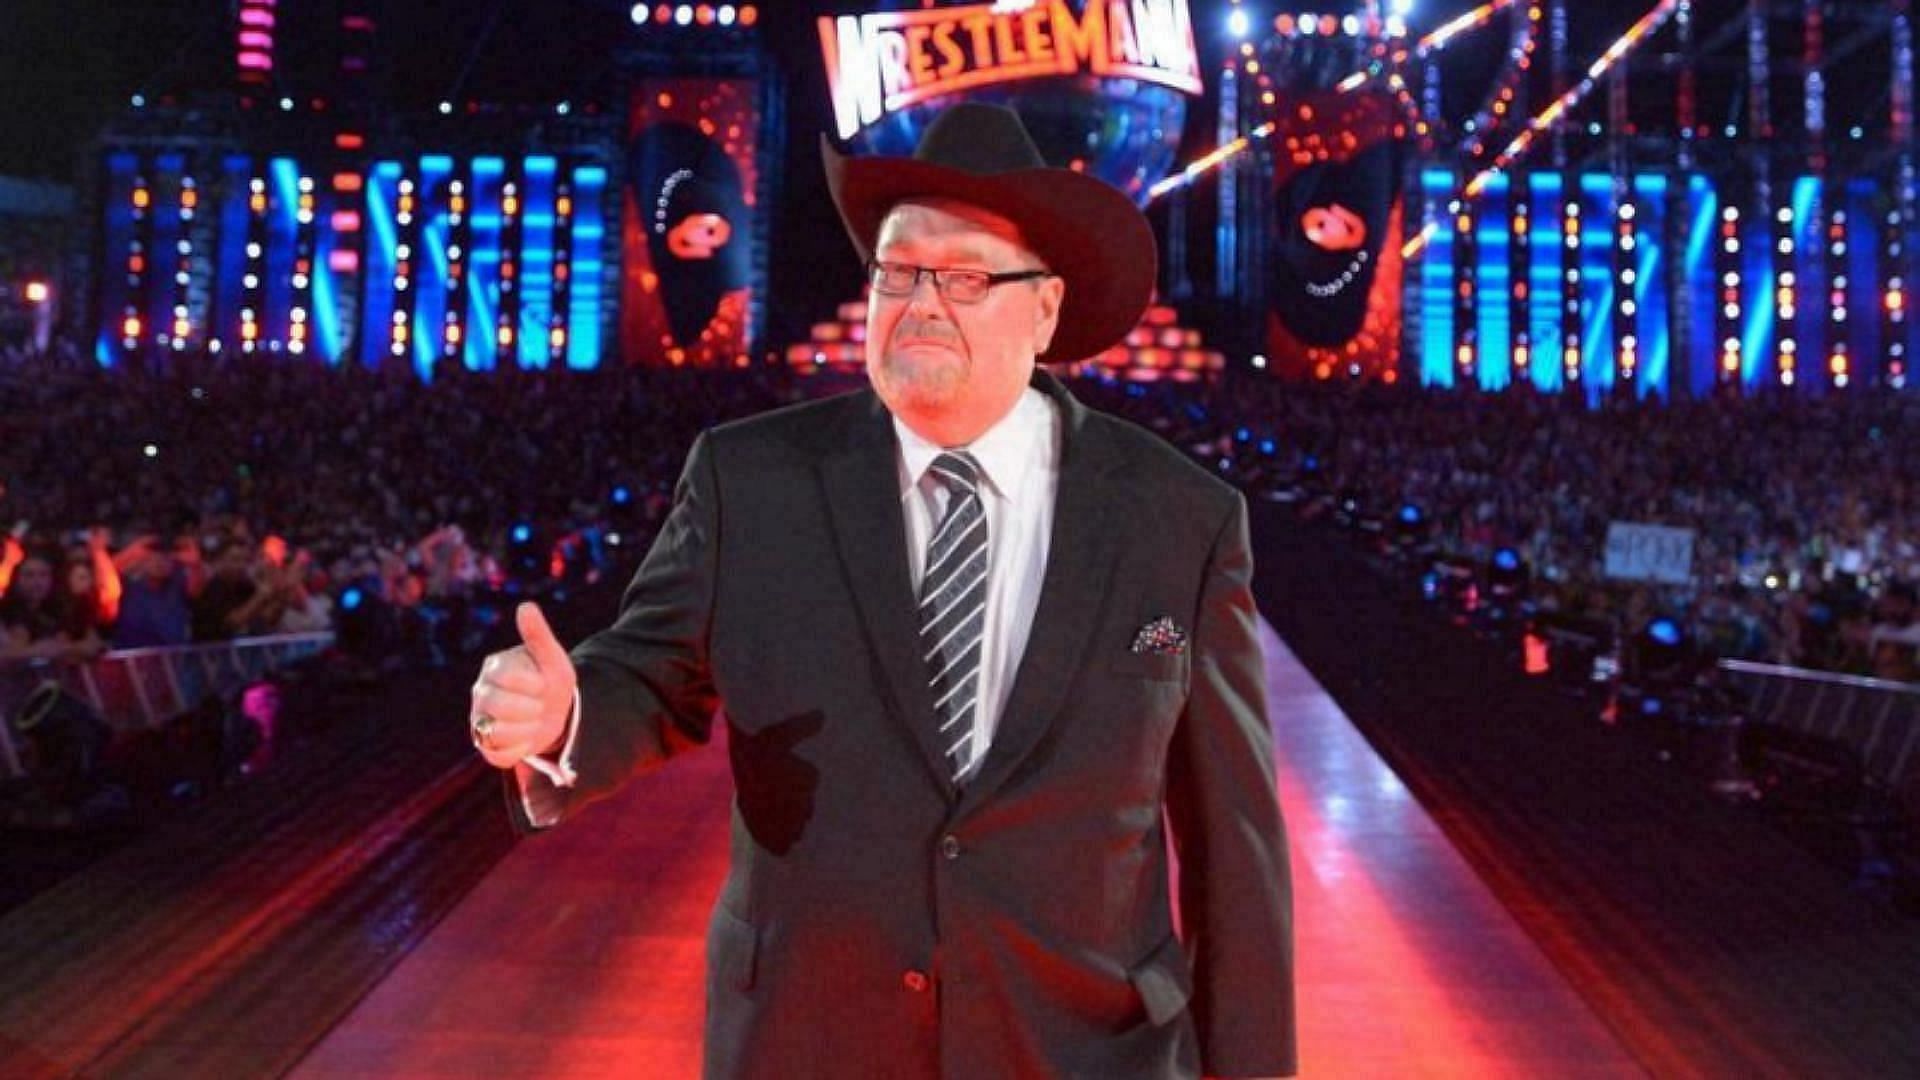 WWE Hall of Famer and AEW commentator Jim Ross